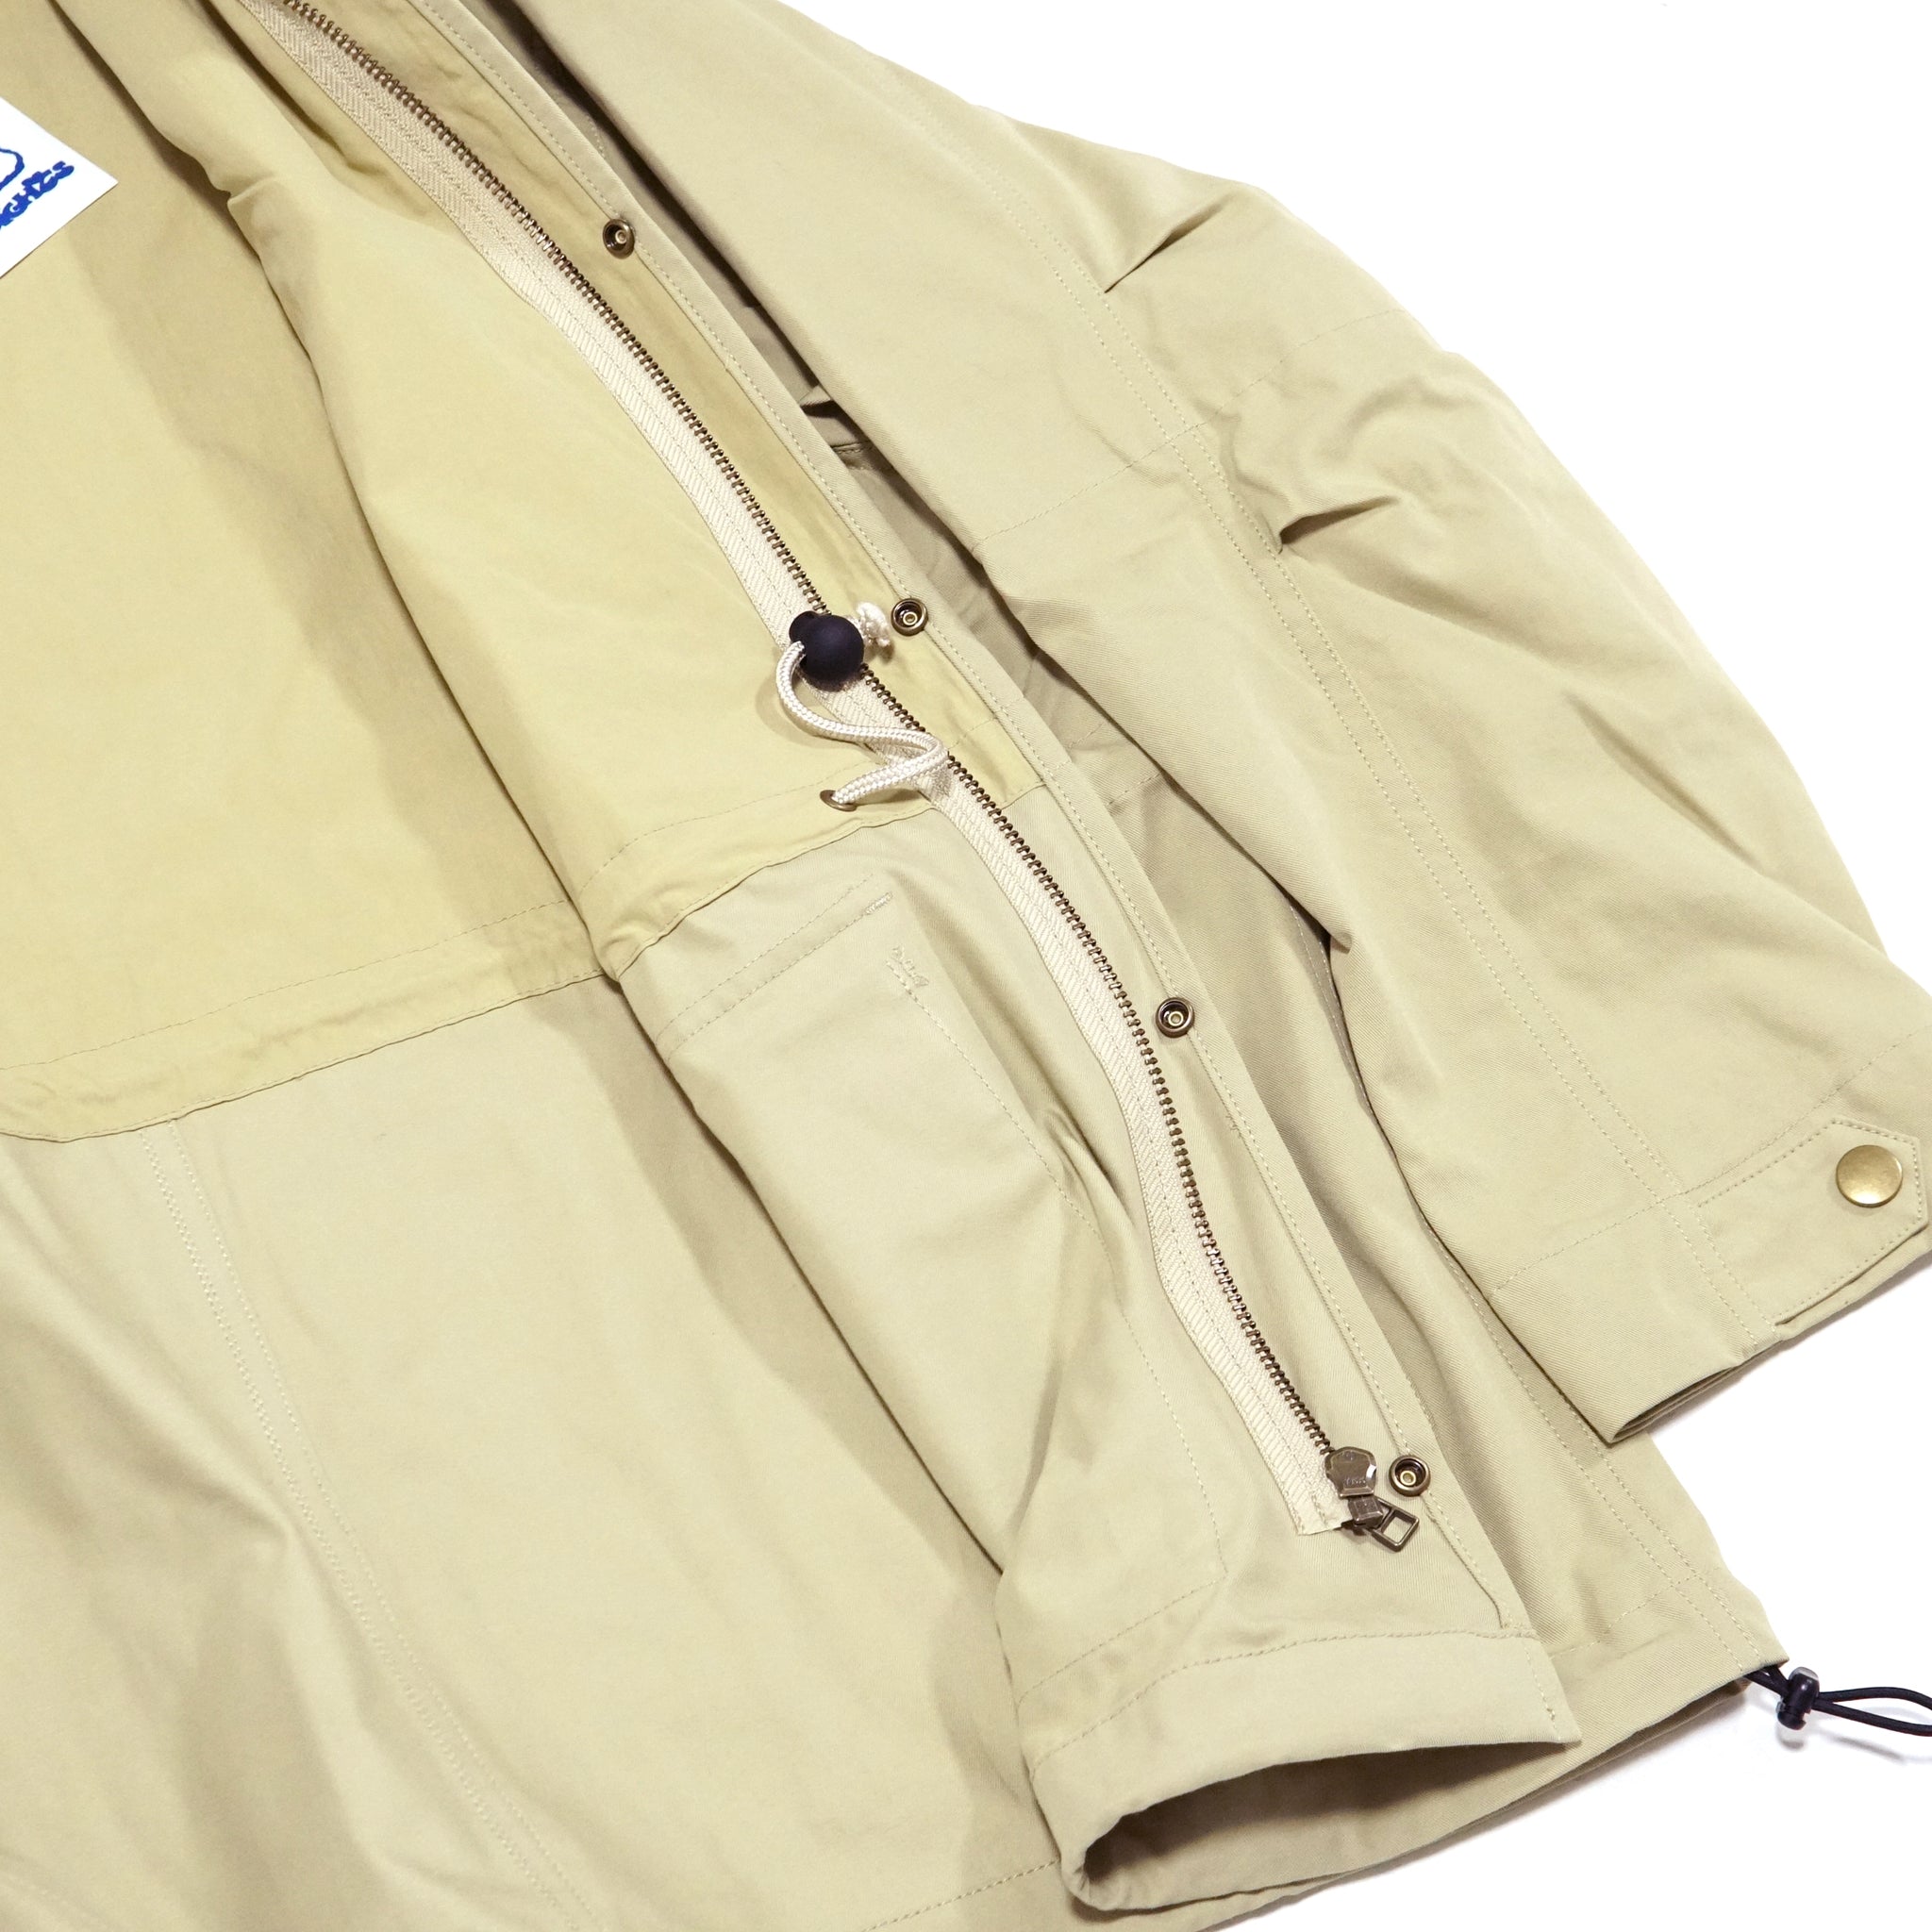 Name: JUNGLE JACKET-Beige | Color: Beige | Size: One Size 【CITYLIGHTS PRODUCTS_シティライツプロダクツ】